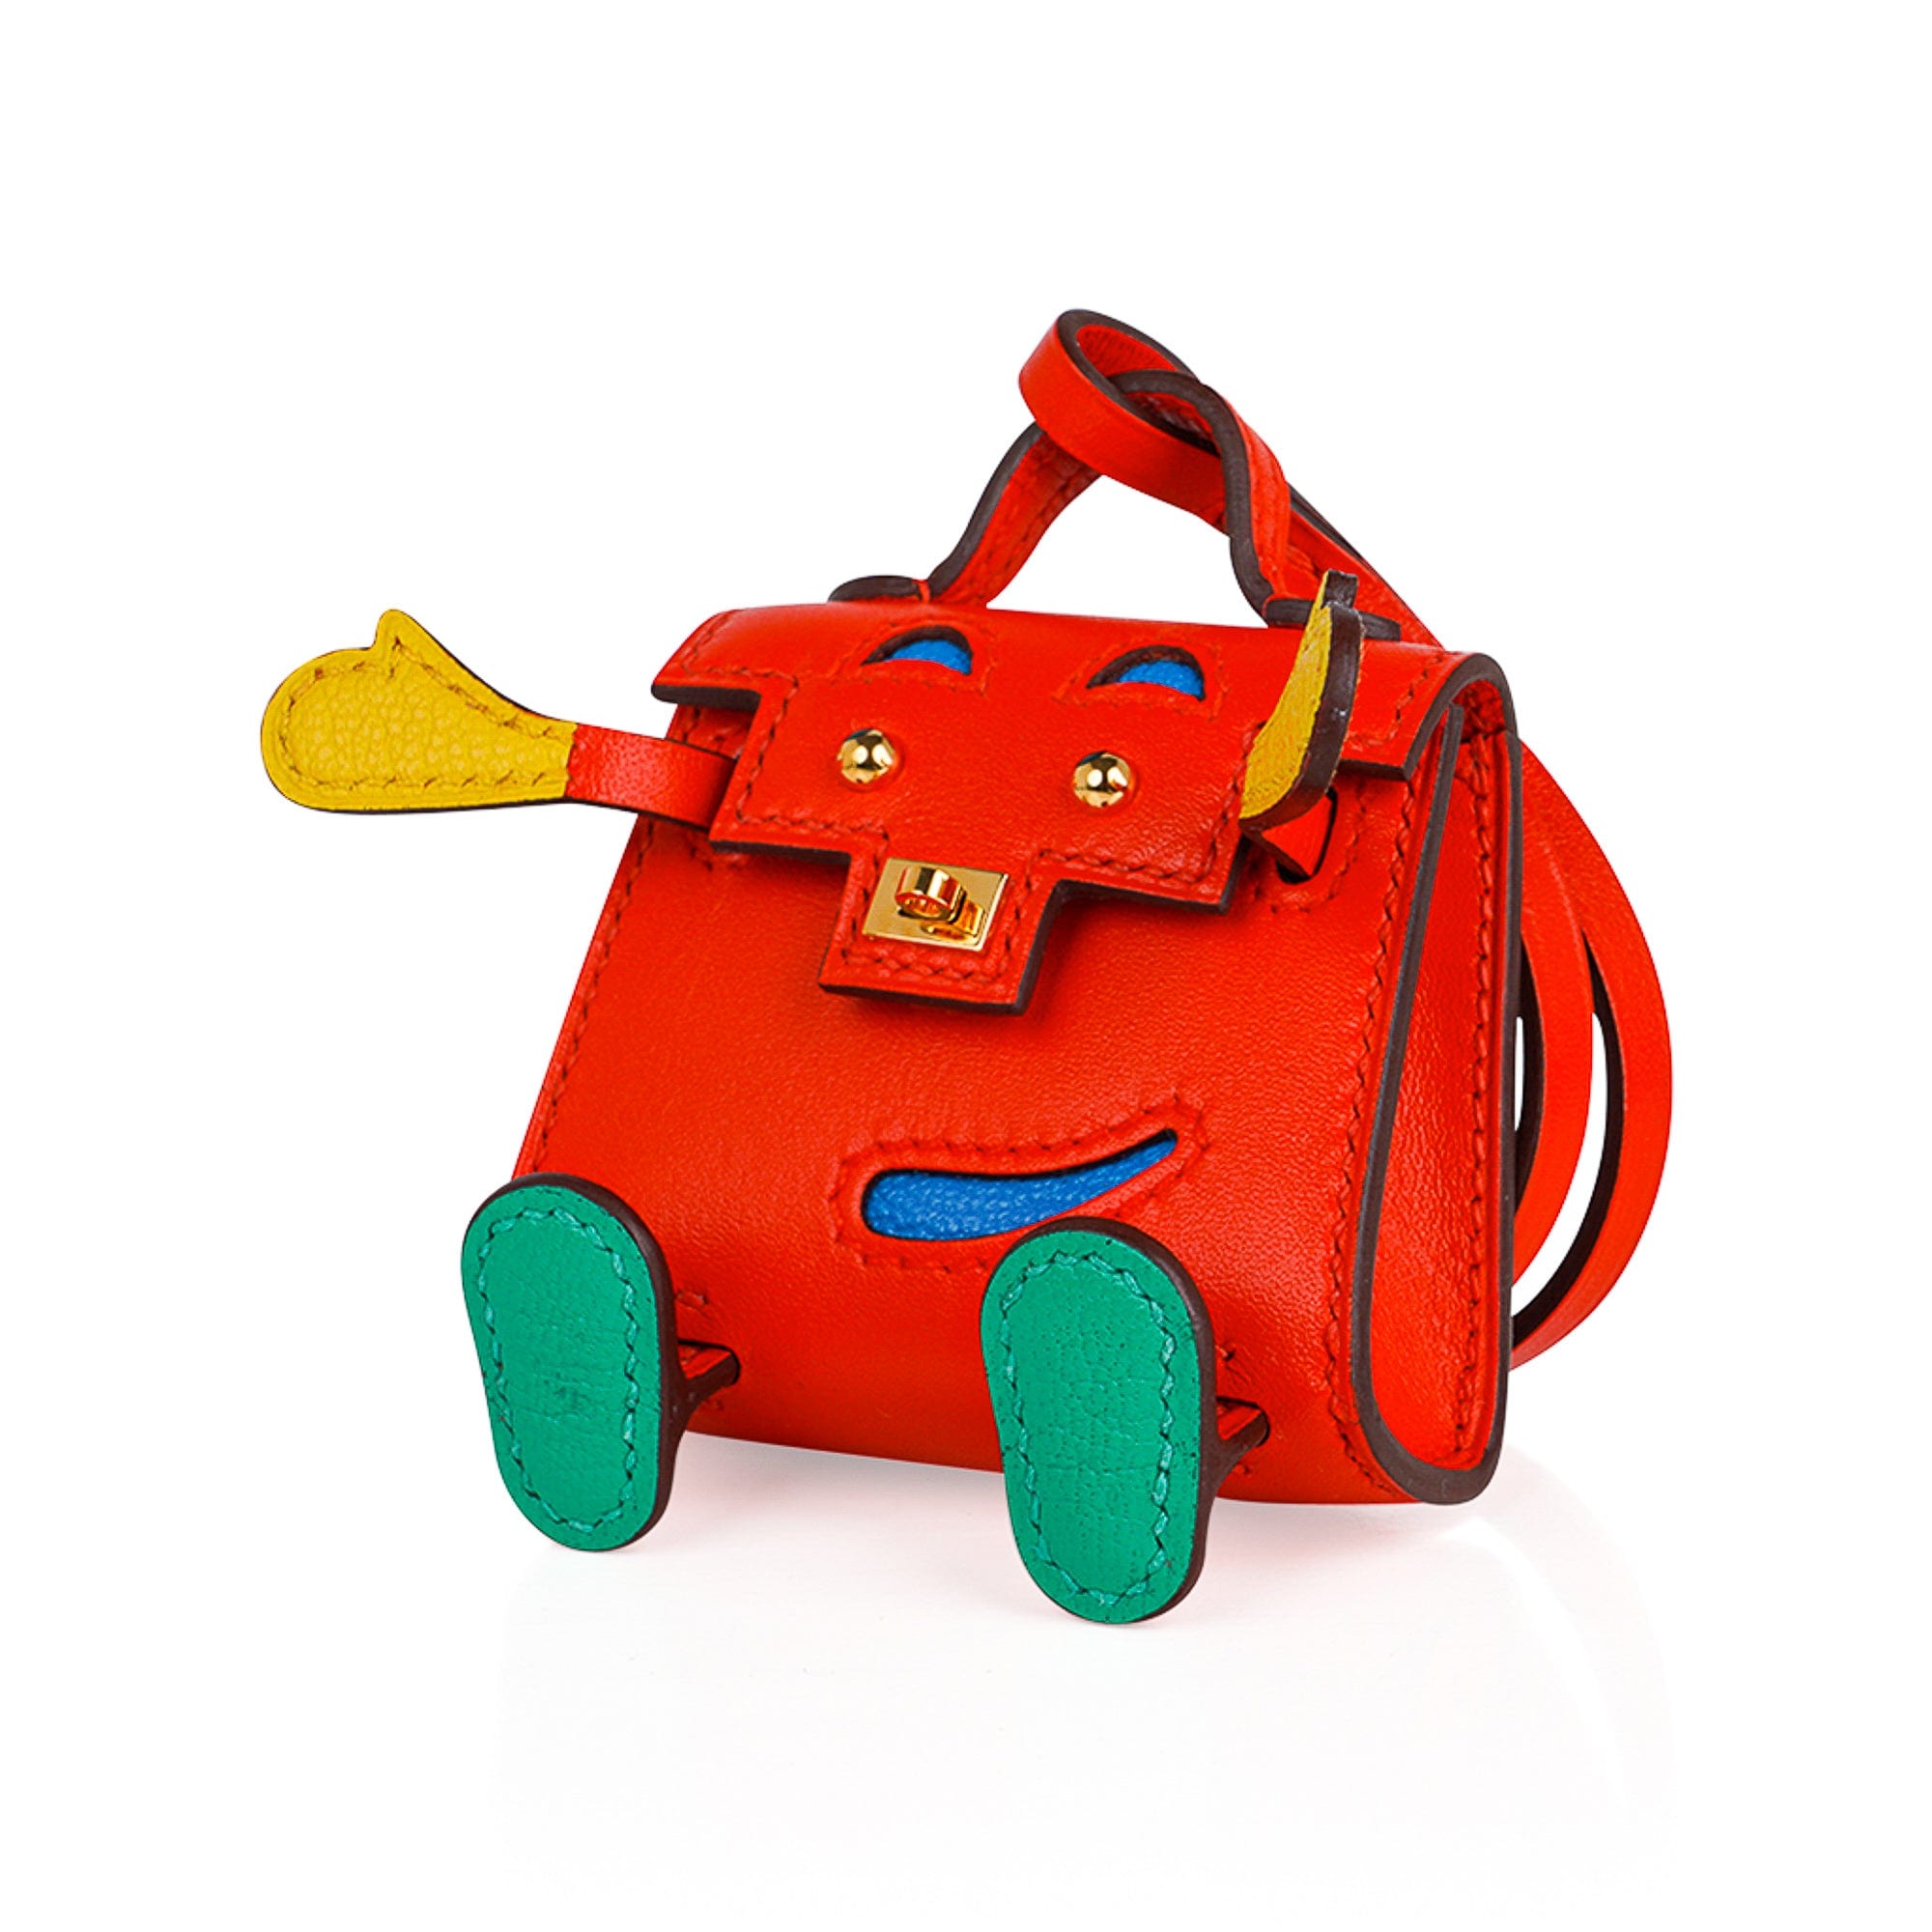 HERMES KELLY DOLL BAG & NEW HERMES LAUNCHES SPRING 2021